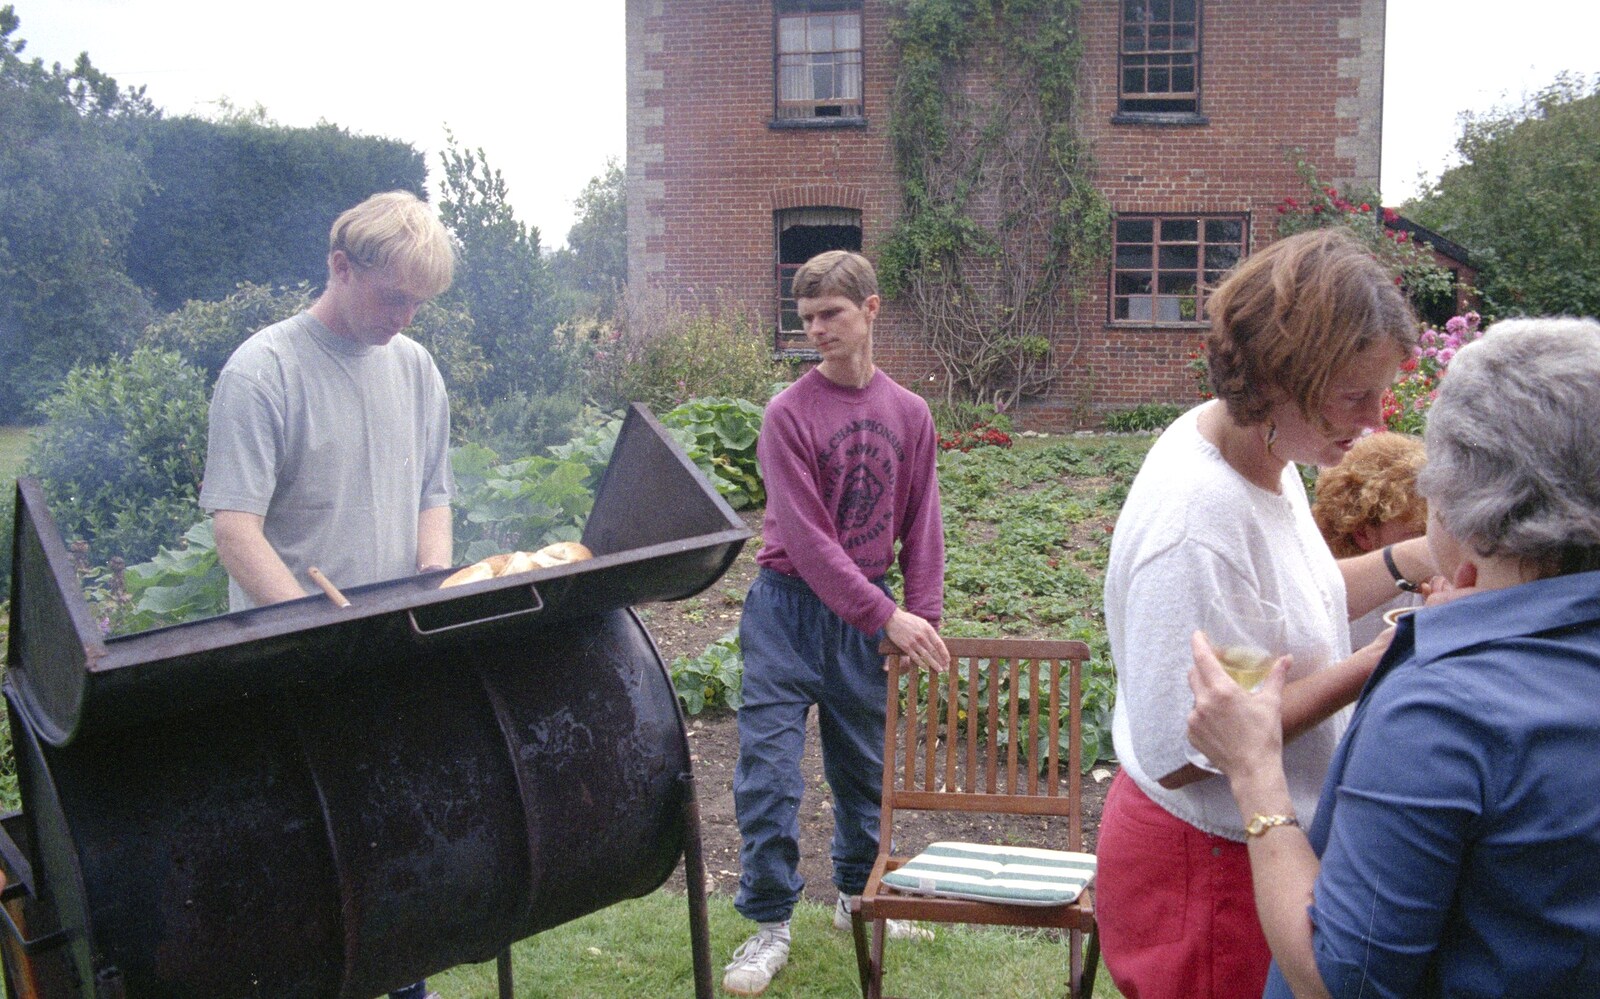 Paul mans the barbeque from A Mortlock Barbeque and a CISU Party, Suffolk - 11th July 1999